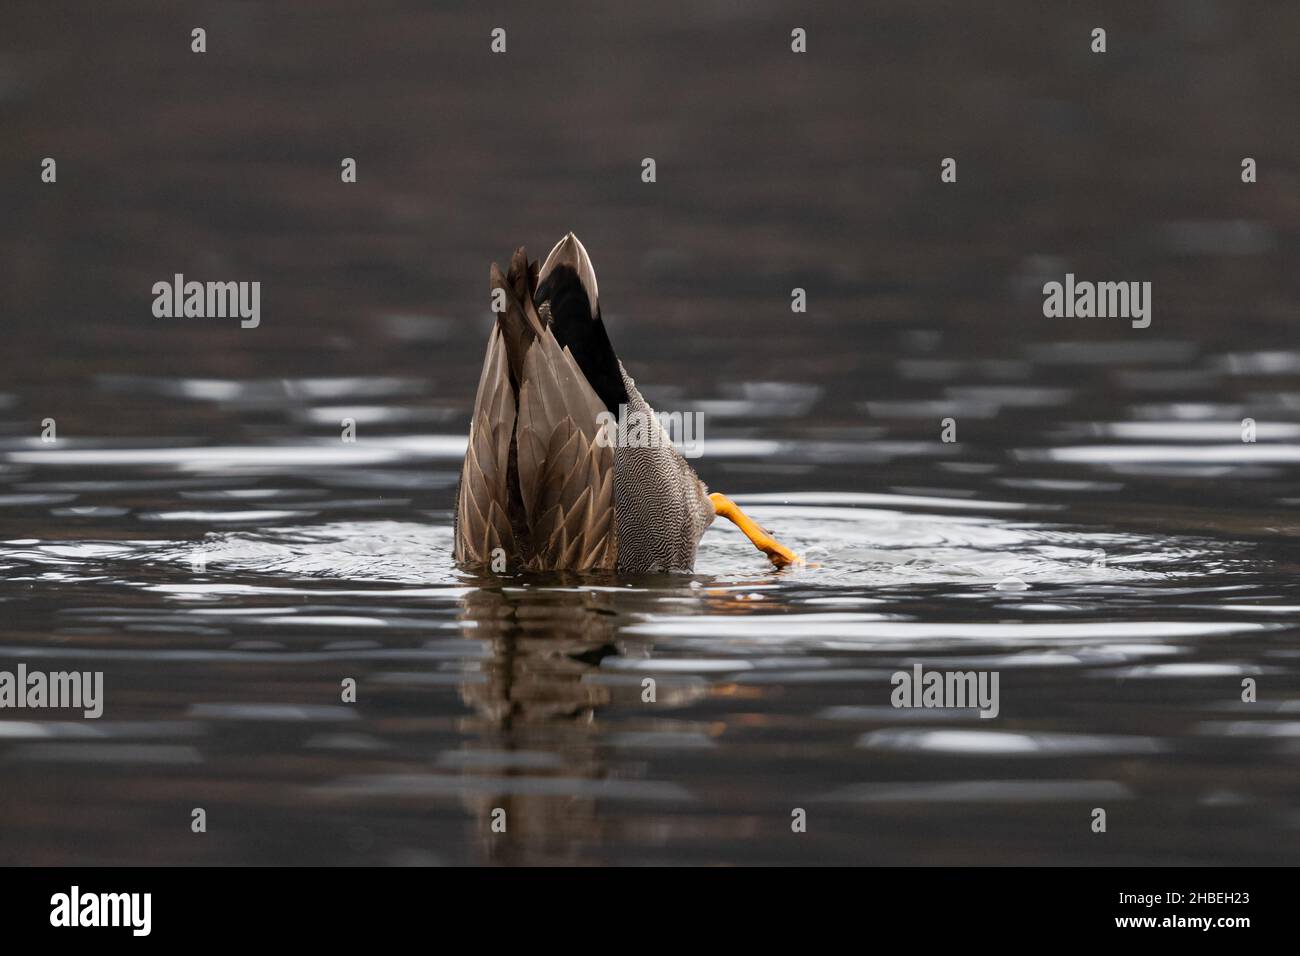 An adult male Gadwall (Mareca strepera) dabbling in shallow waters Stock Photo